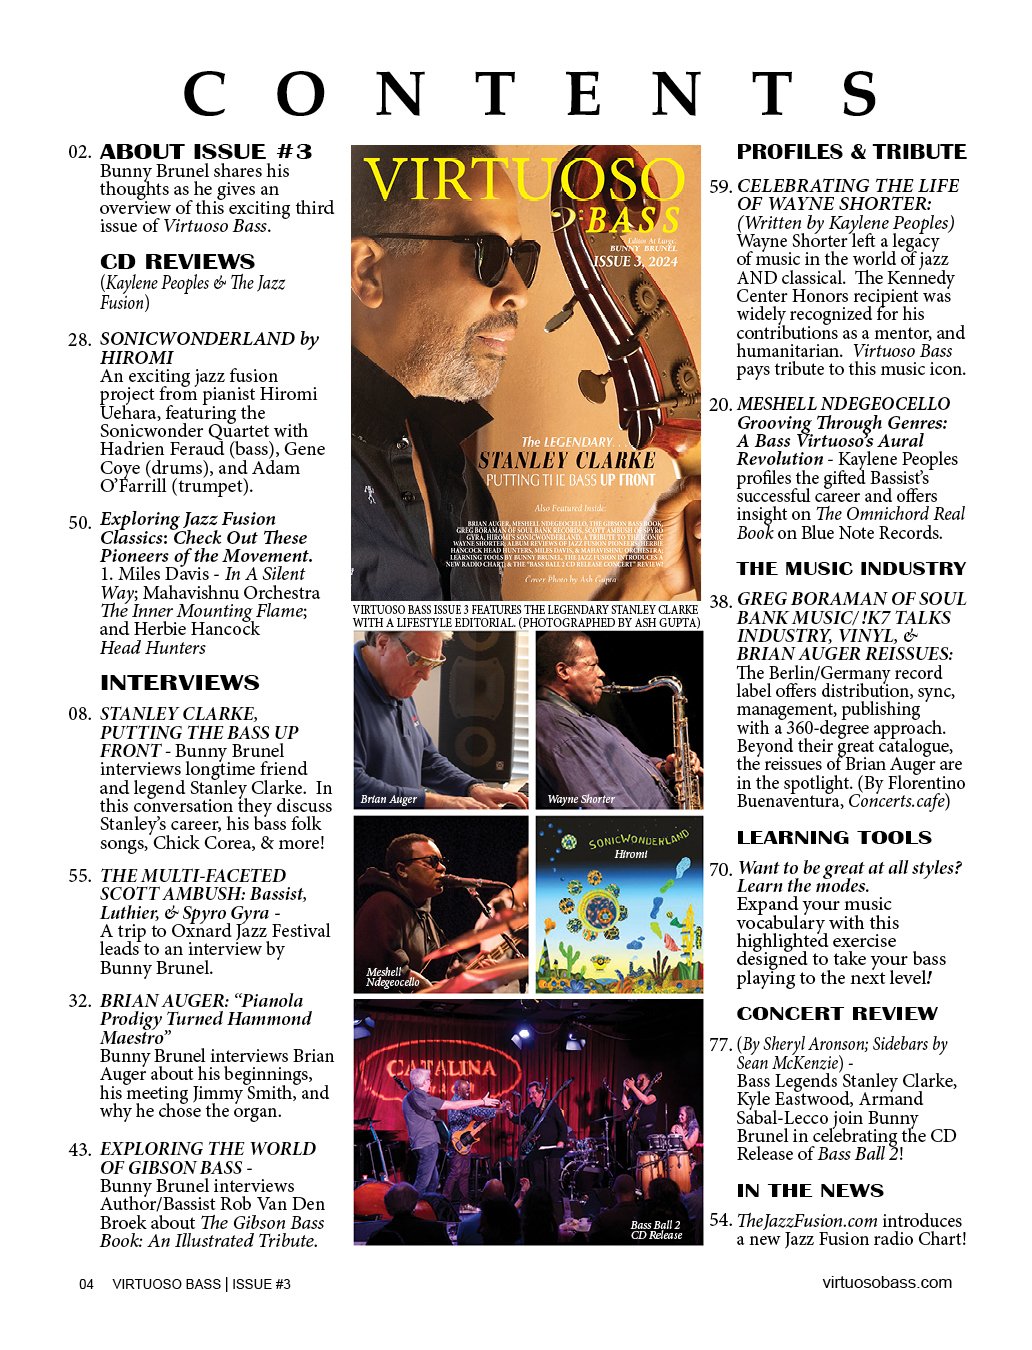 Virtuoso Bass Issue 3, Table of Contents